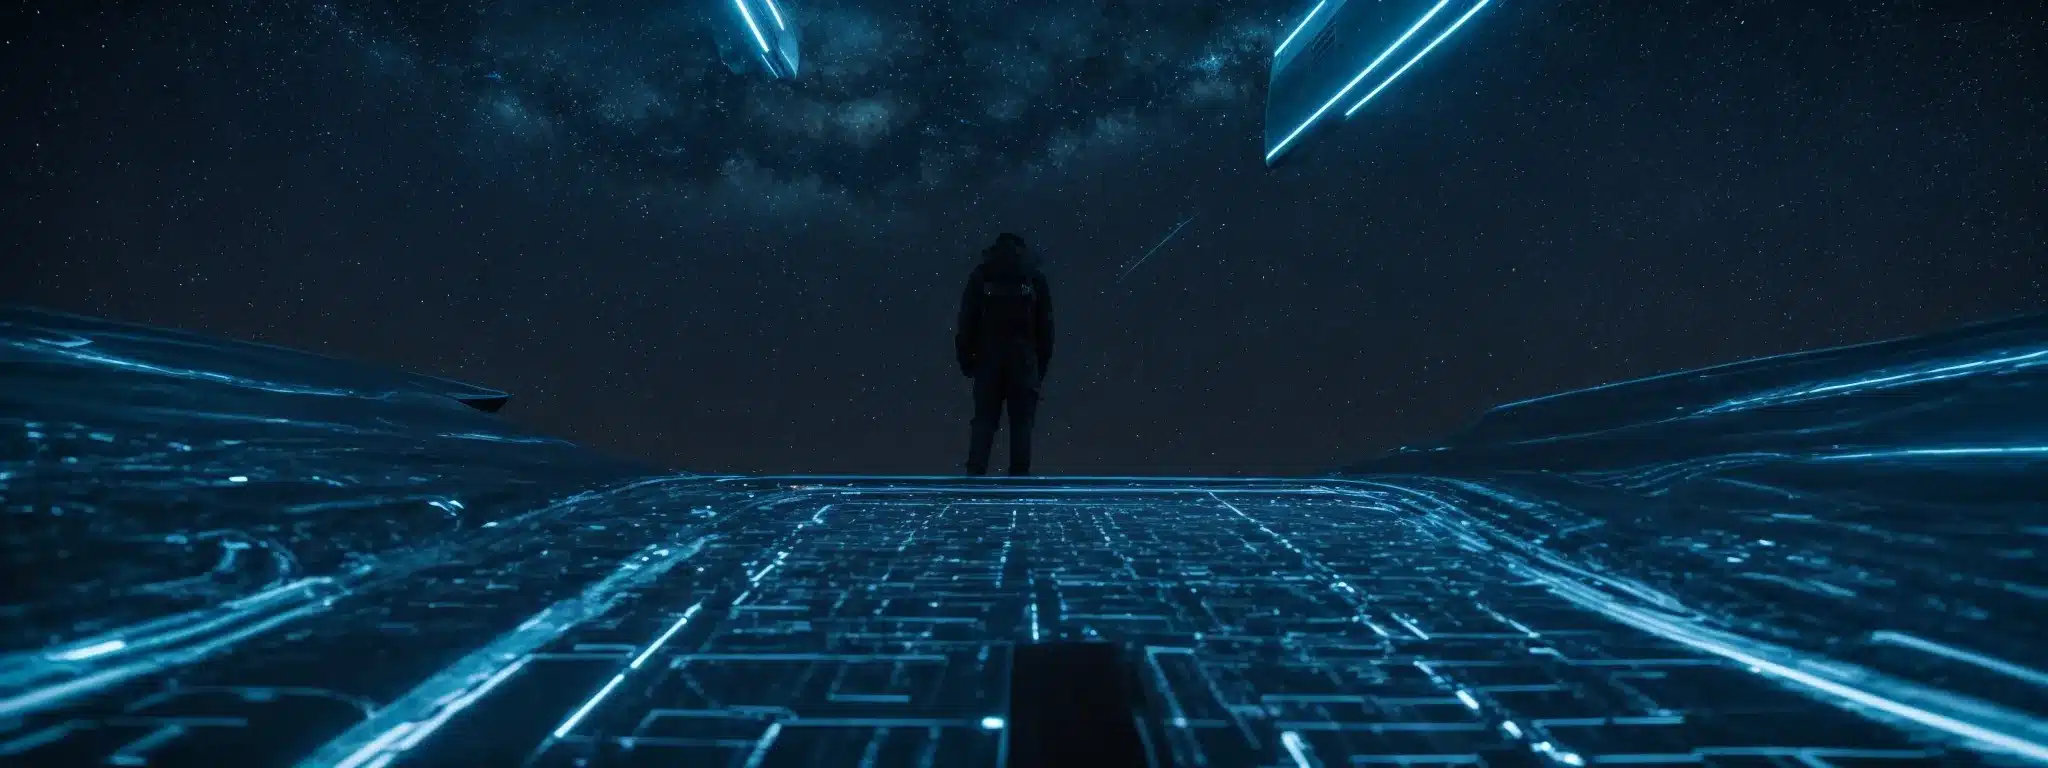 A Lone Figure Stands At The Helm Of A Sleek Futuristic Ship Gliding Through A Sea Of Digital Code Under A Vast Network Of Interconnected Stars.